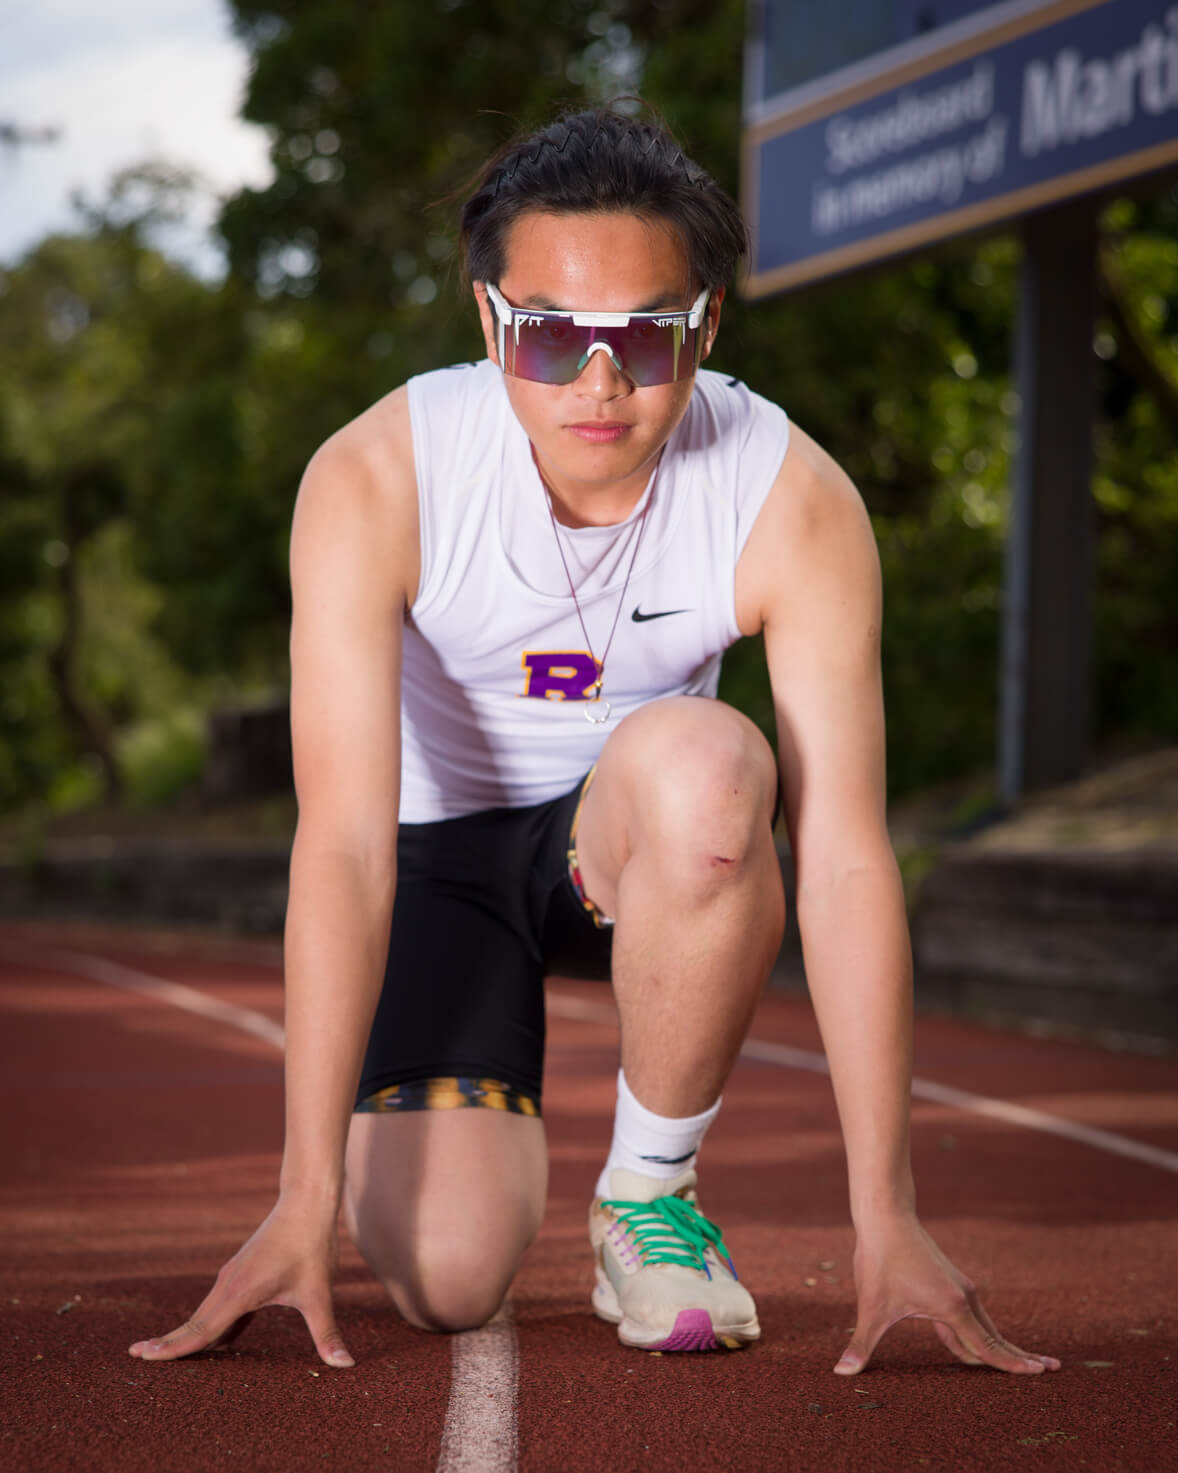 Track and field individual photos for athletic leagues, middle schools and high schools in California